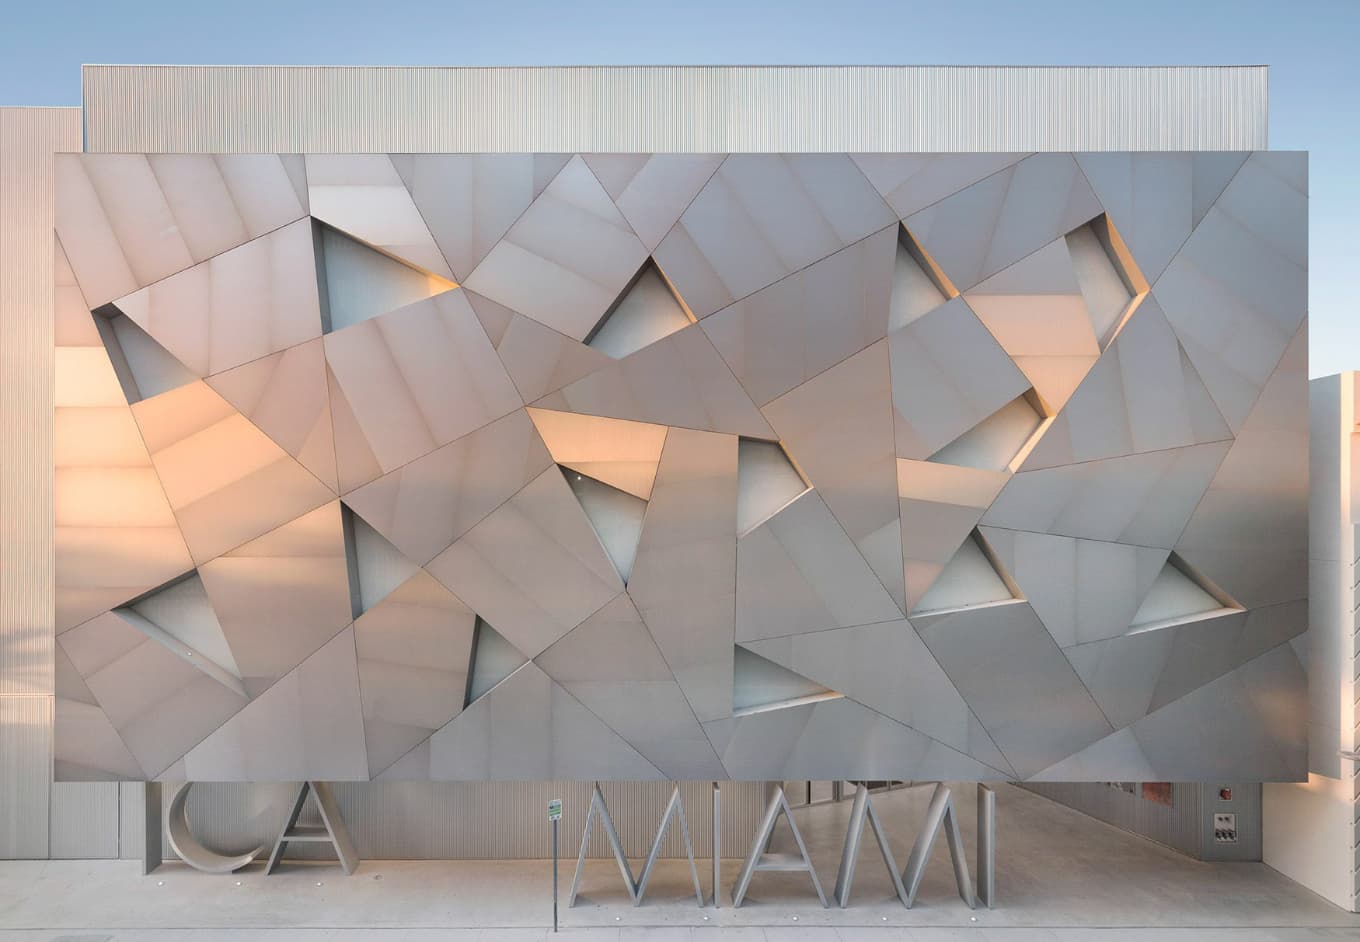 Miami's Design District Wants to Be the Coolest Neighborhood in America